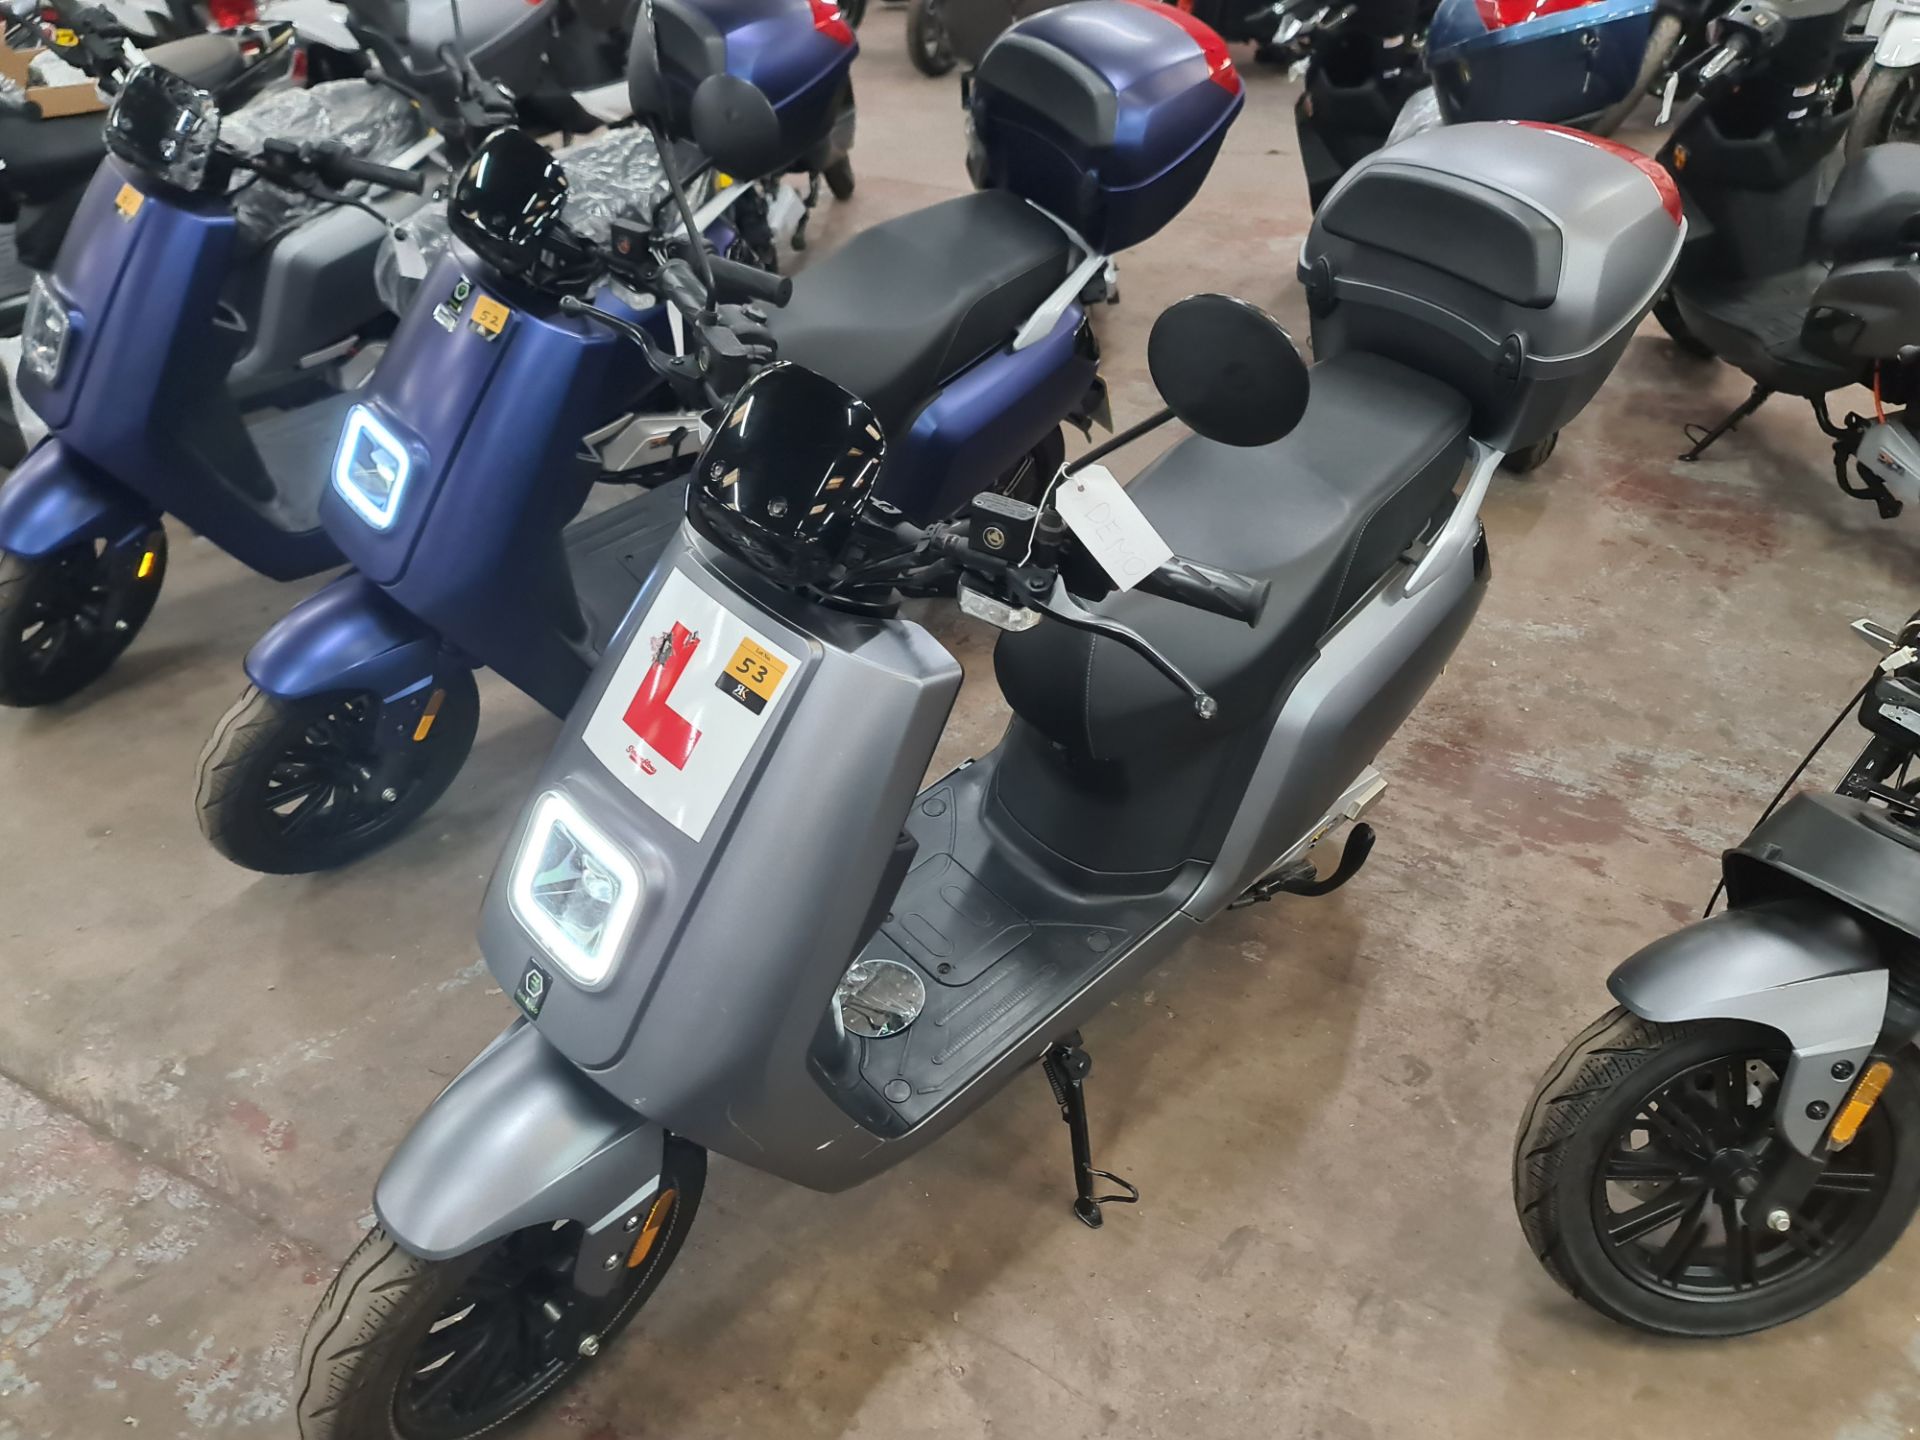 LP70 AXY Senda 3000 dual battery electric moped, colour: grey, 50cc equivalent, 30mph top speed, 90